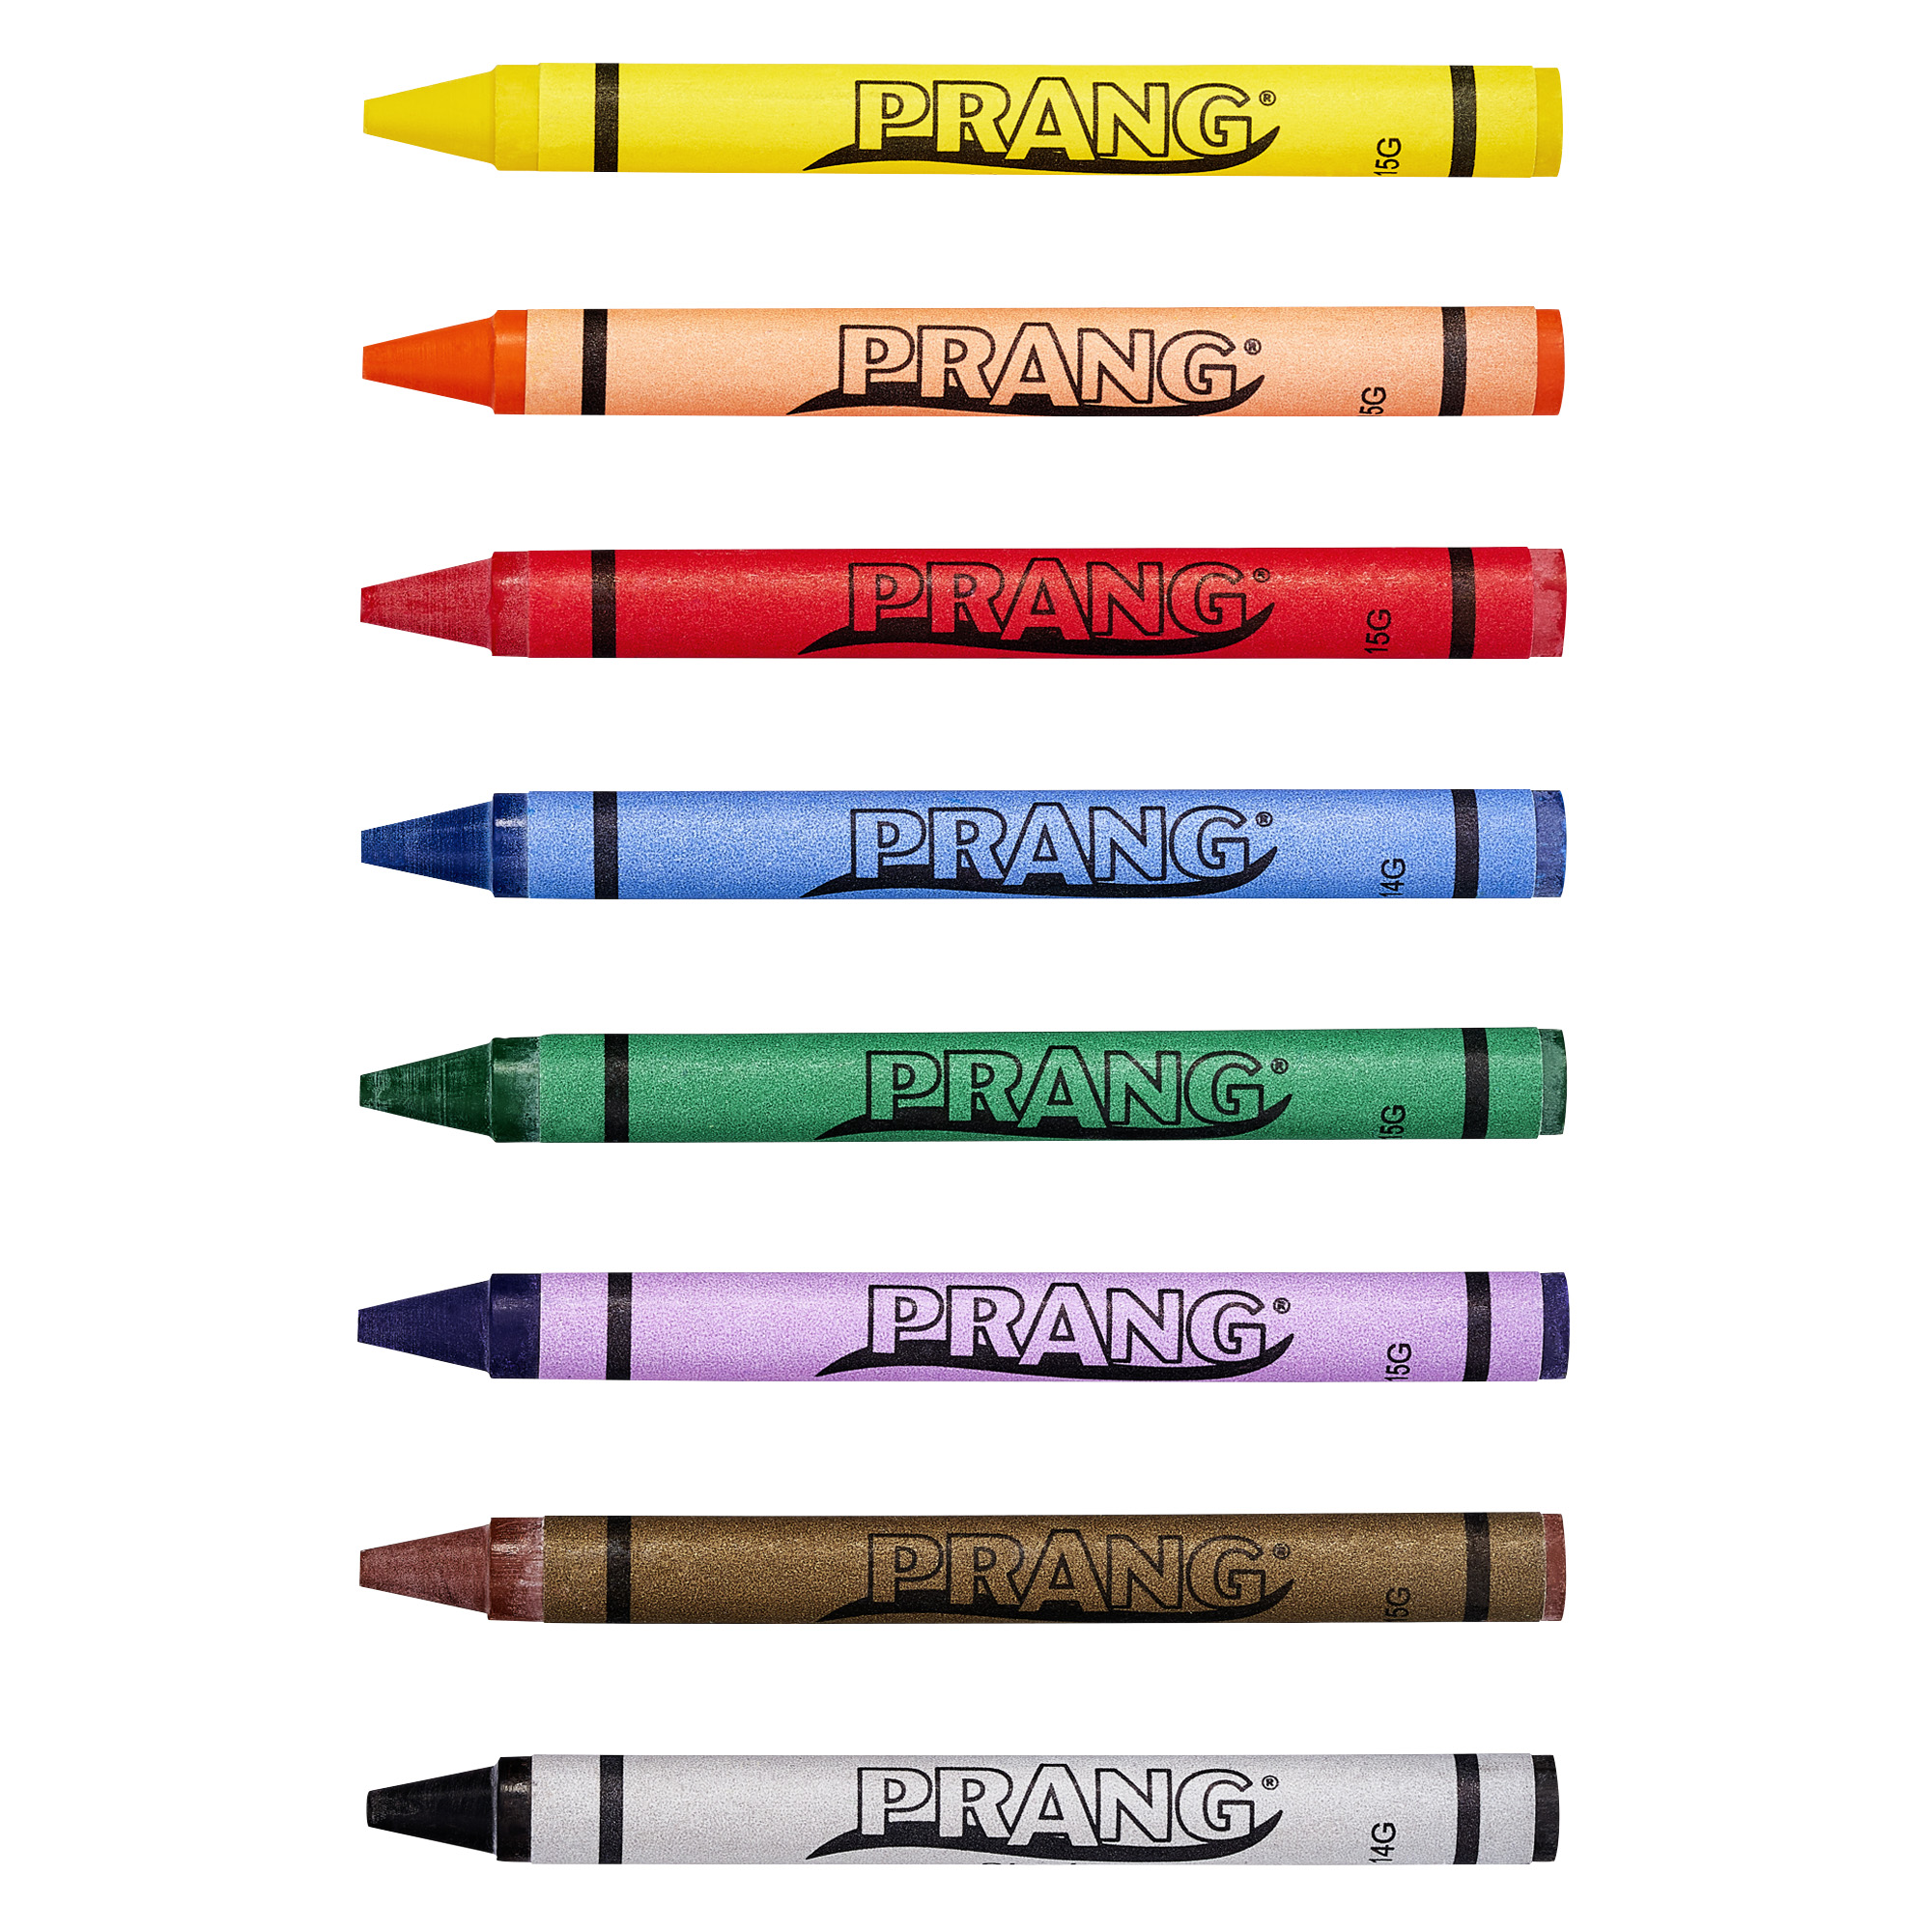 The Teachers' Lounge®  Crayons, Regular Size, Pack of 120